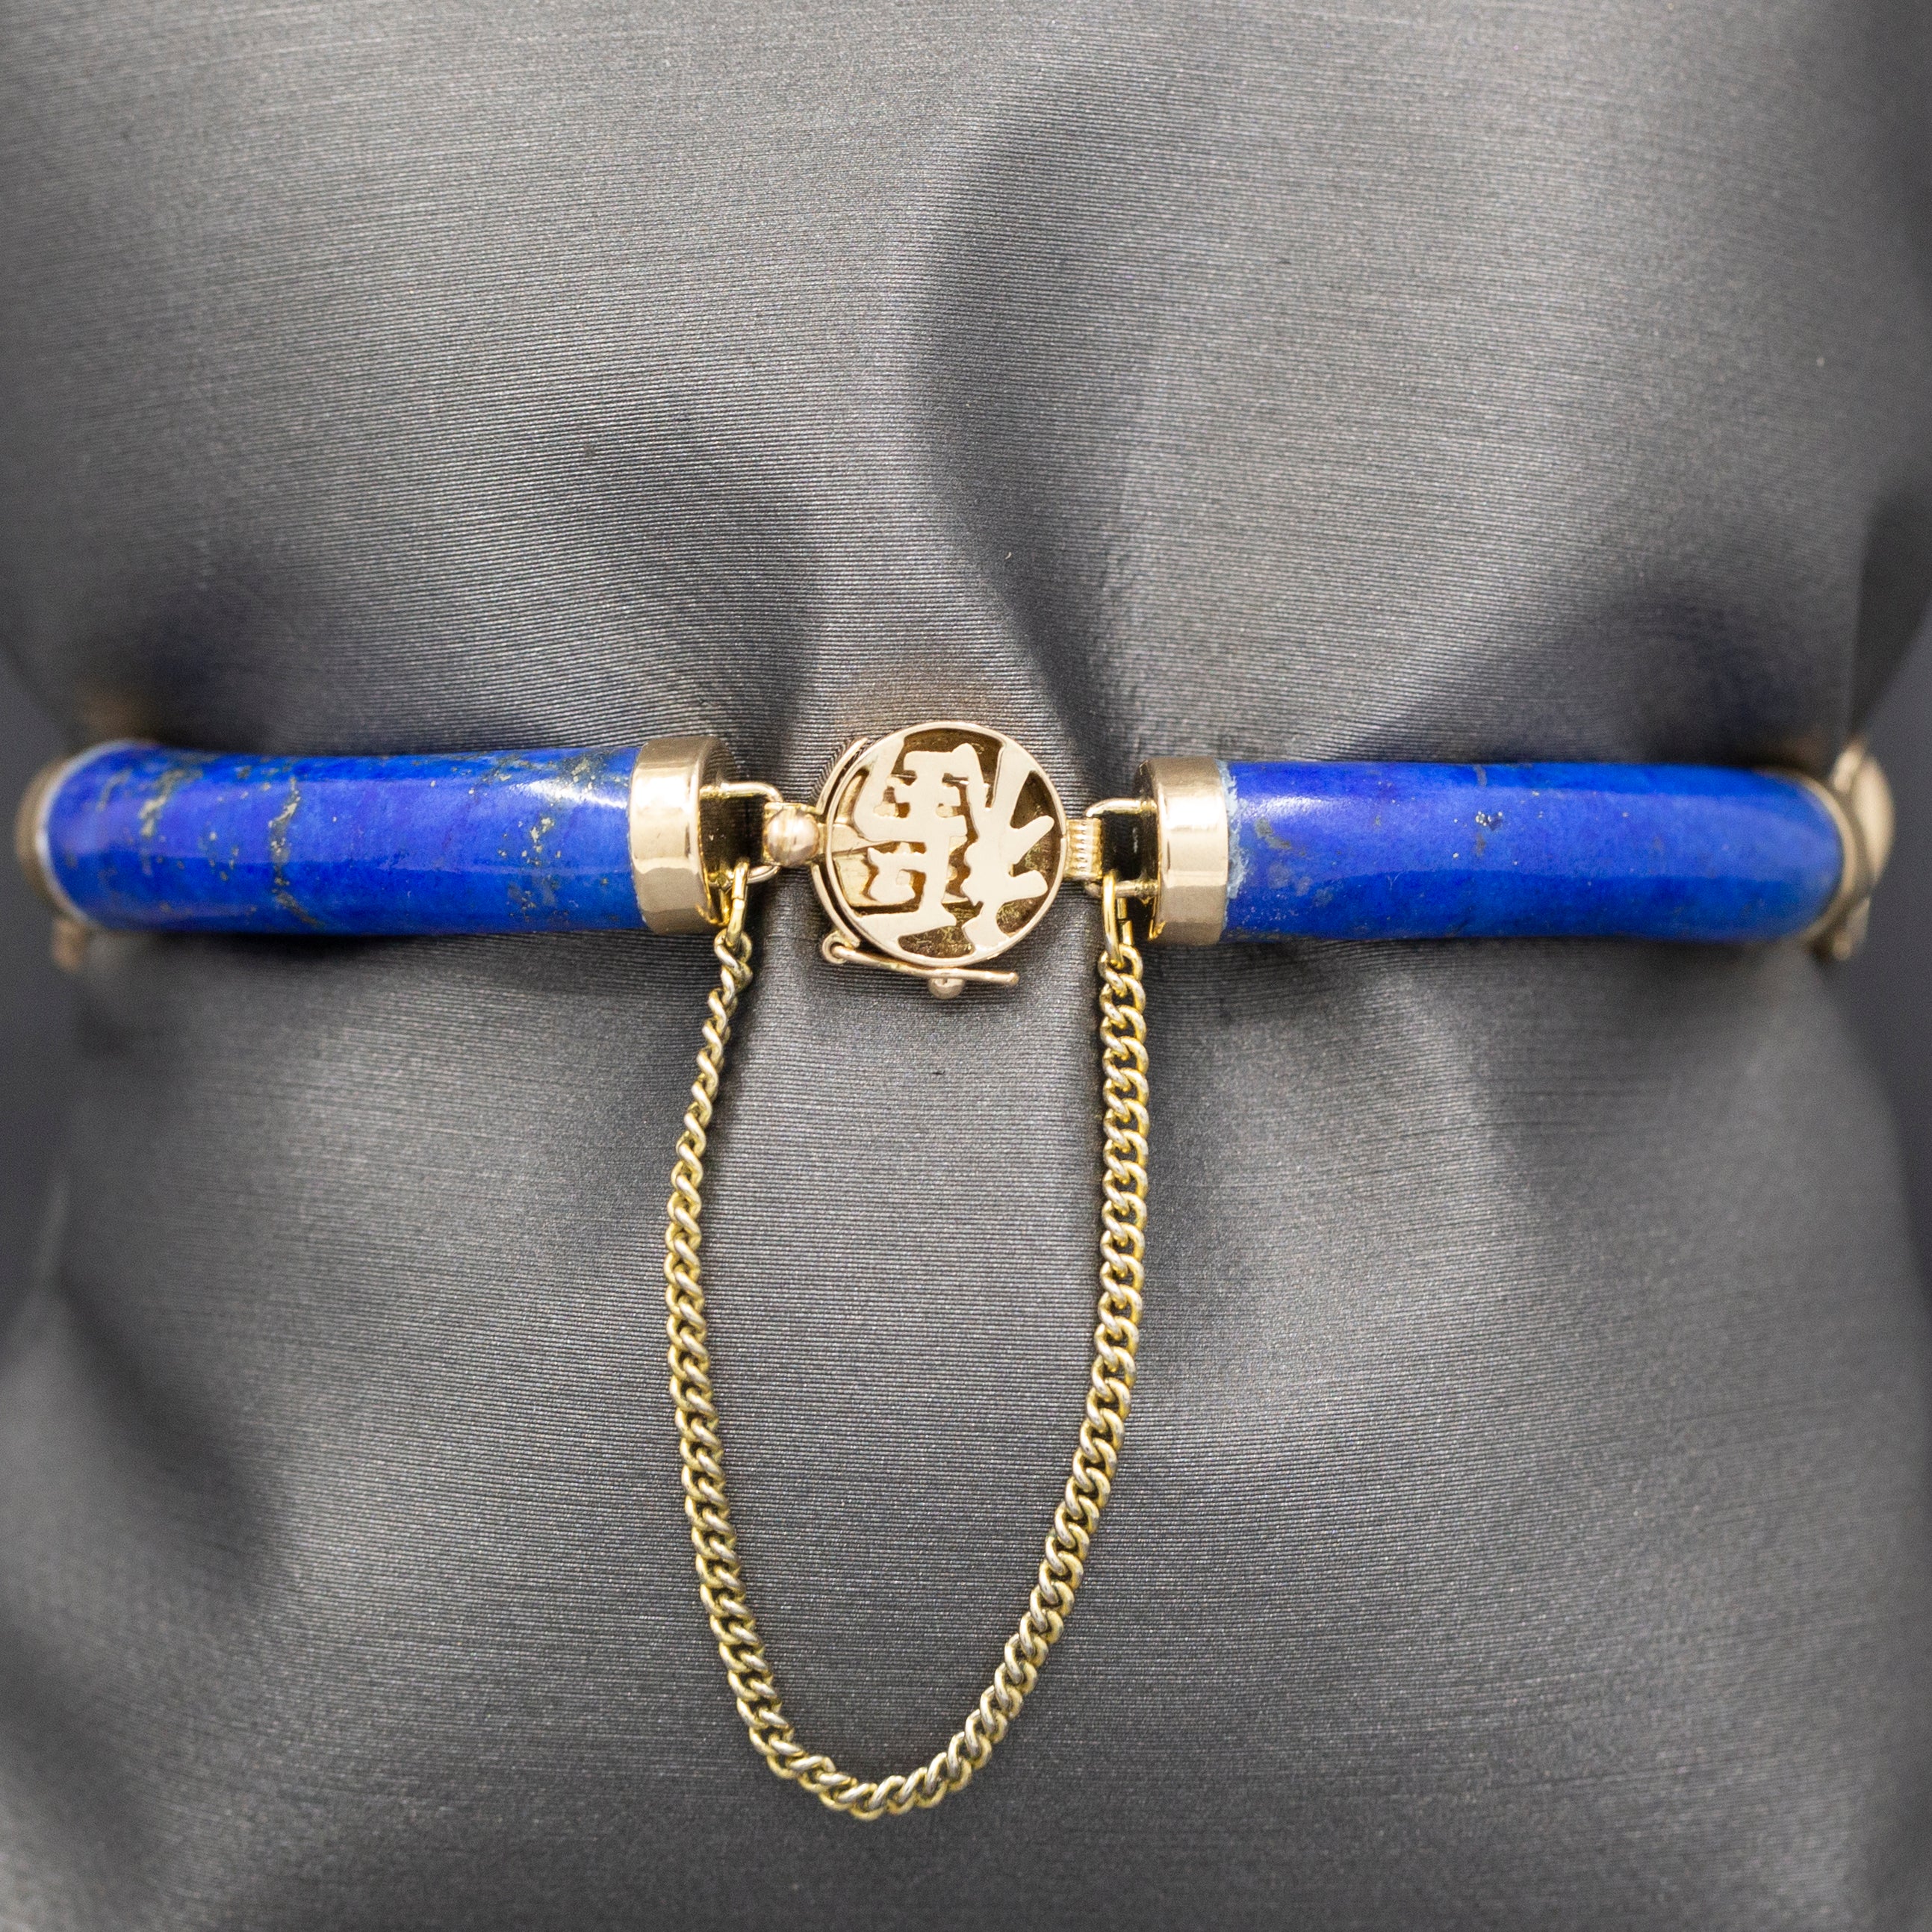 Vintage Lapis Lazuli Section Bracelet with Chinese Characters in 14k Yellow Gold